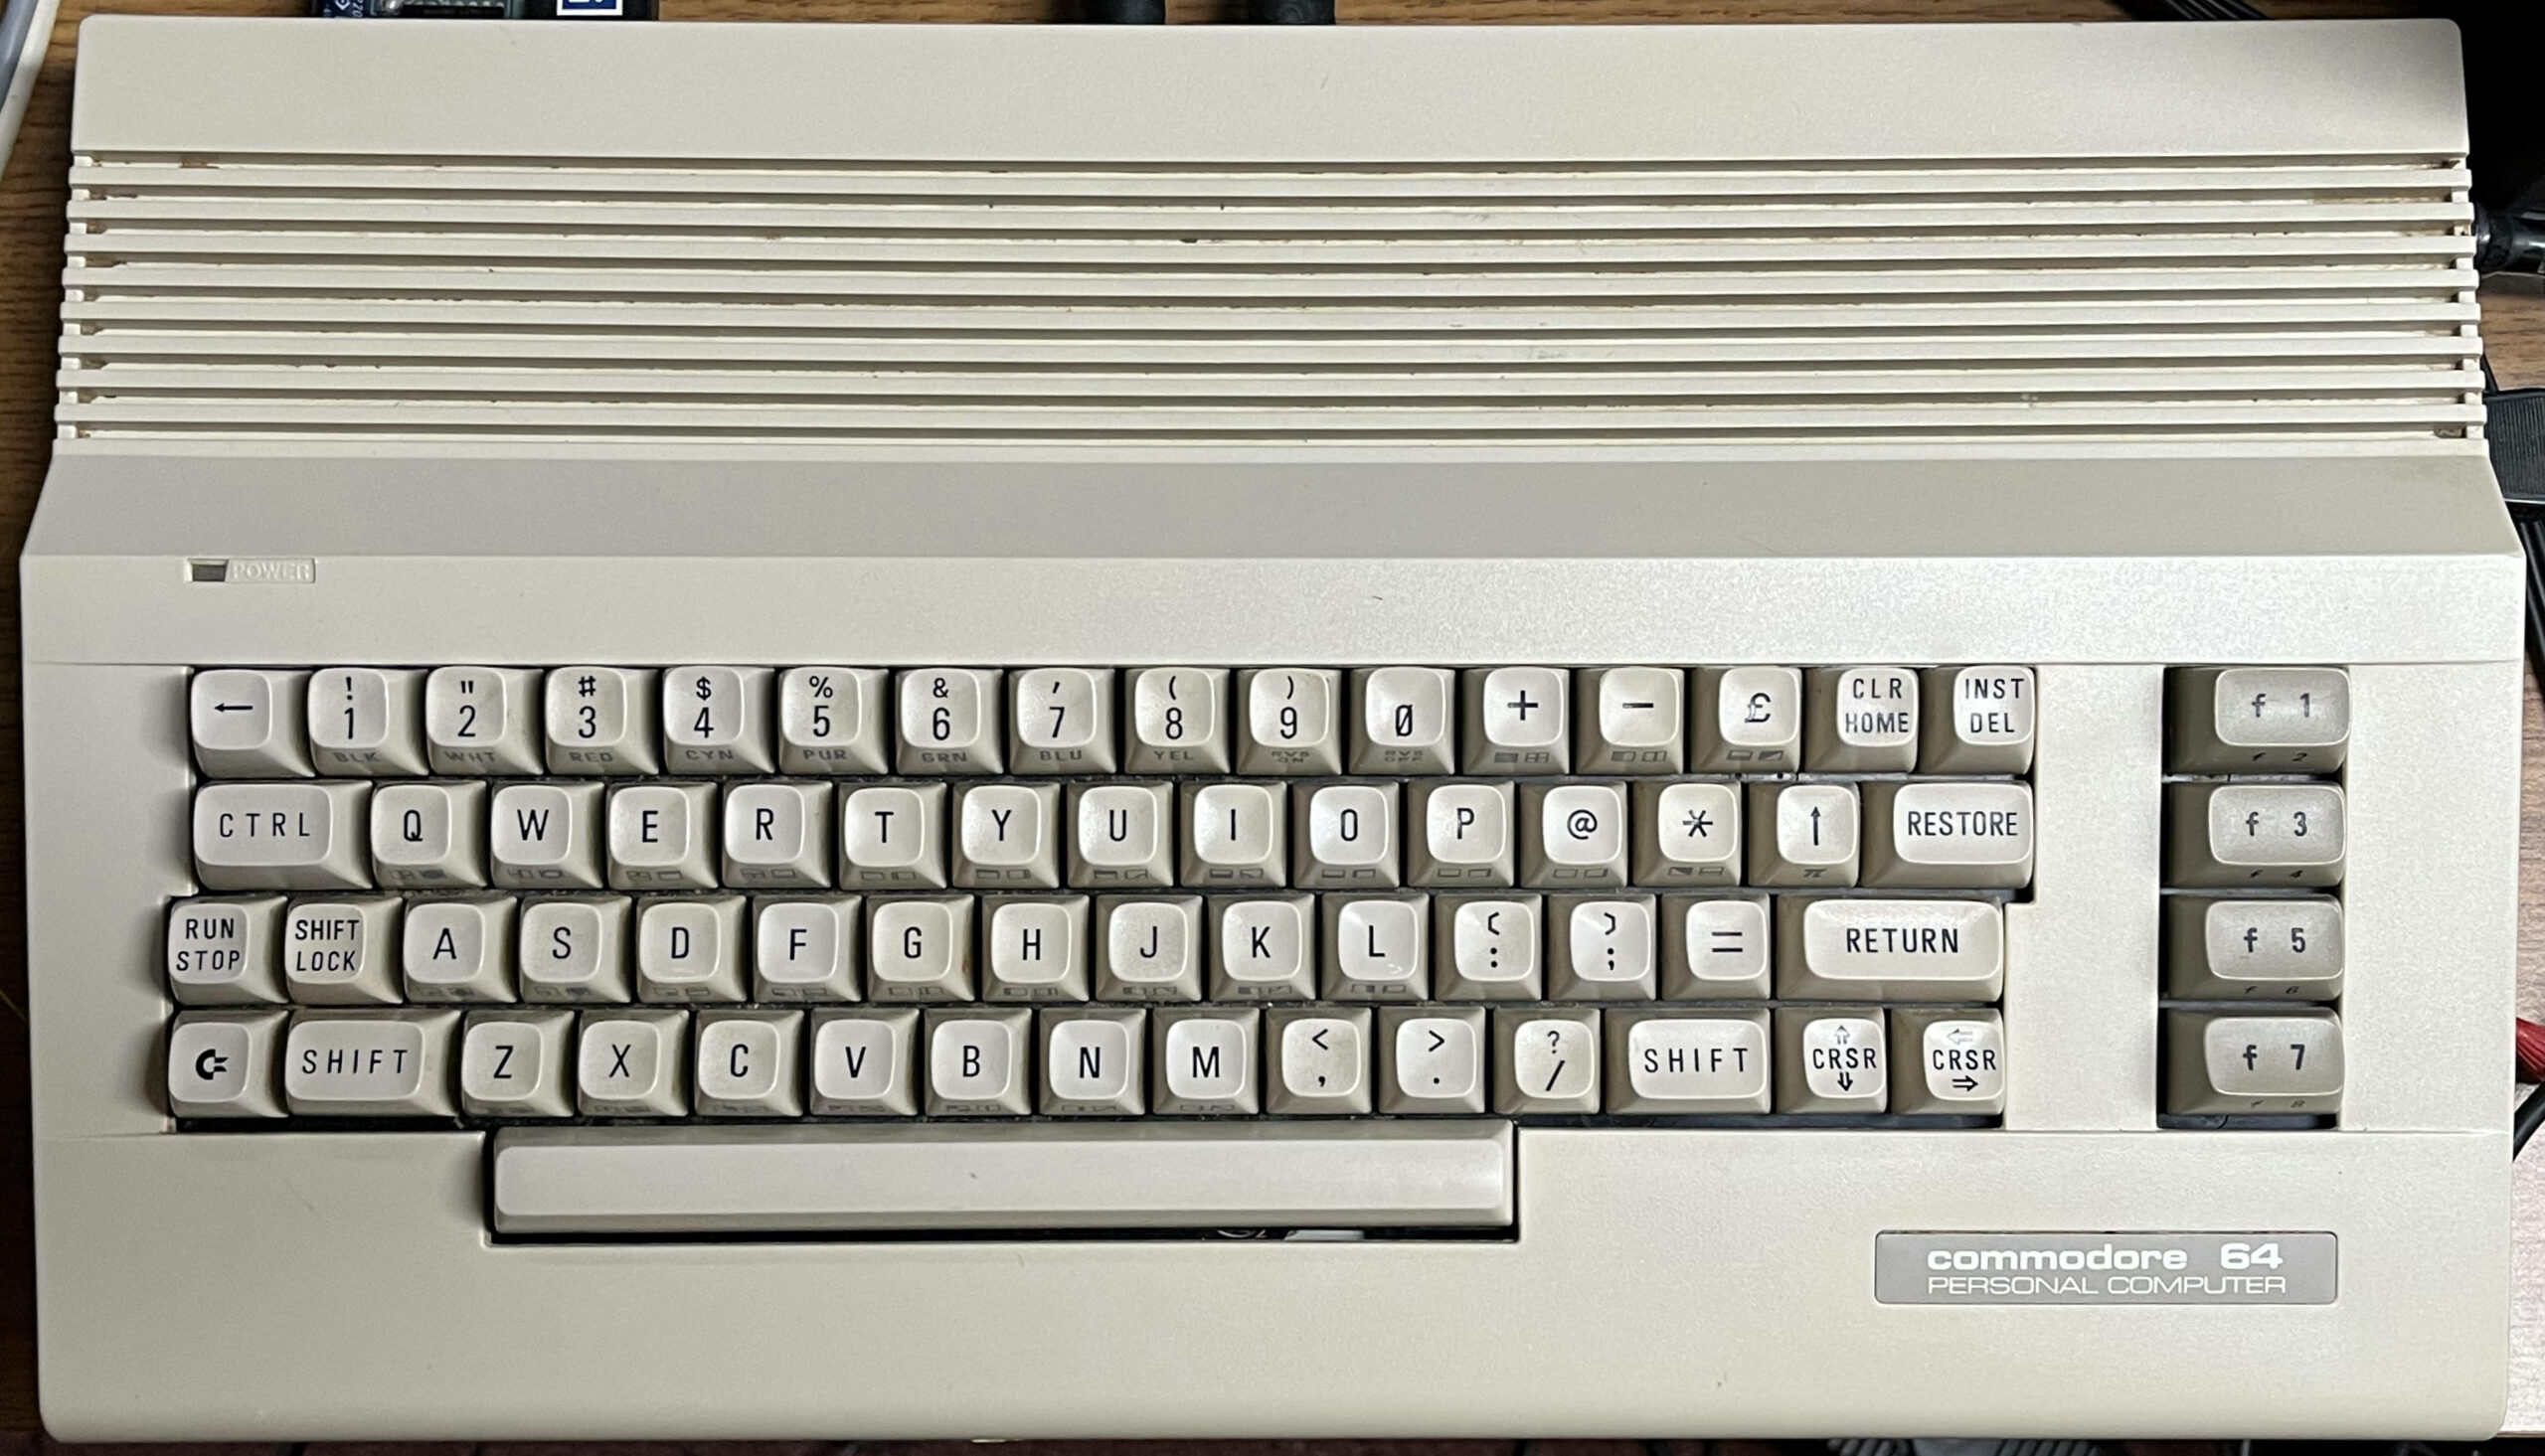 Commodore 64 Computer showing keyboard and label